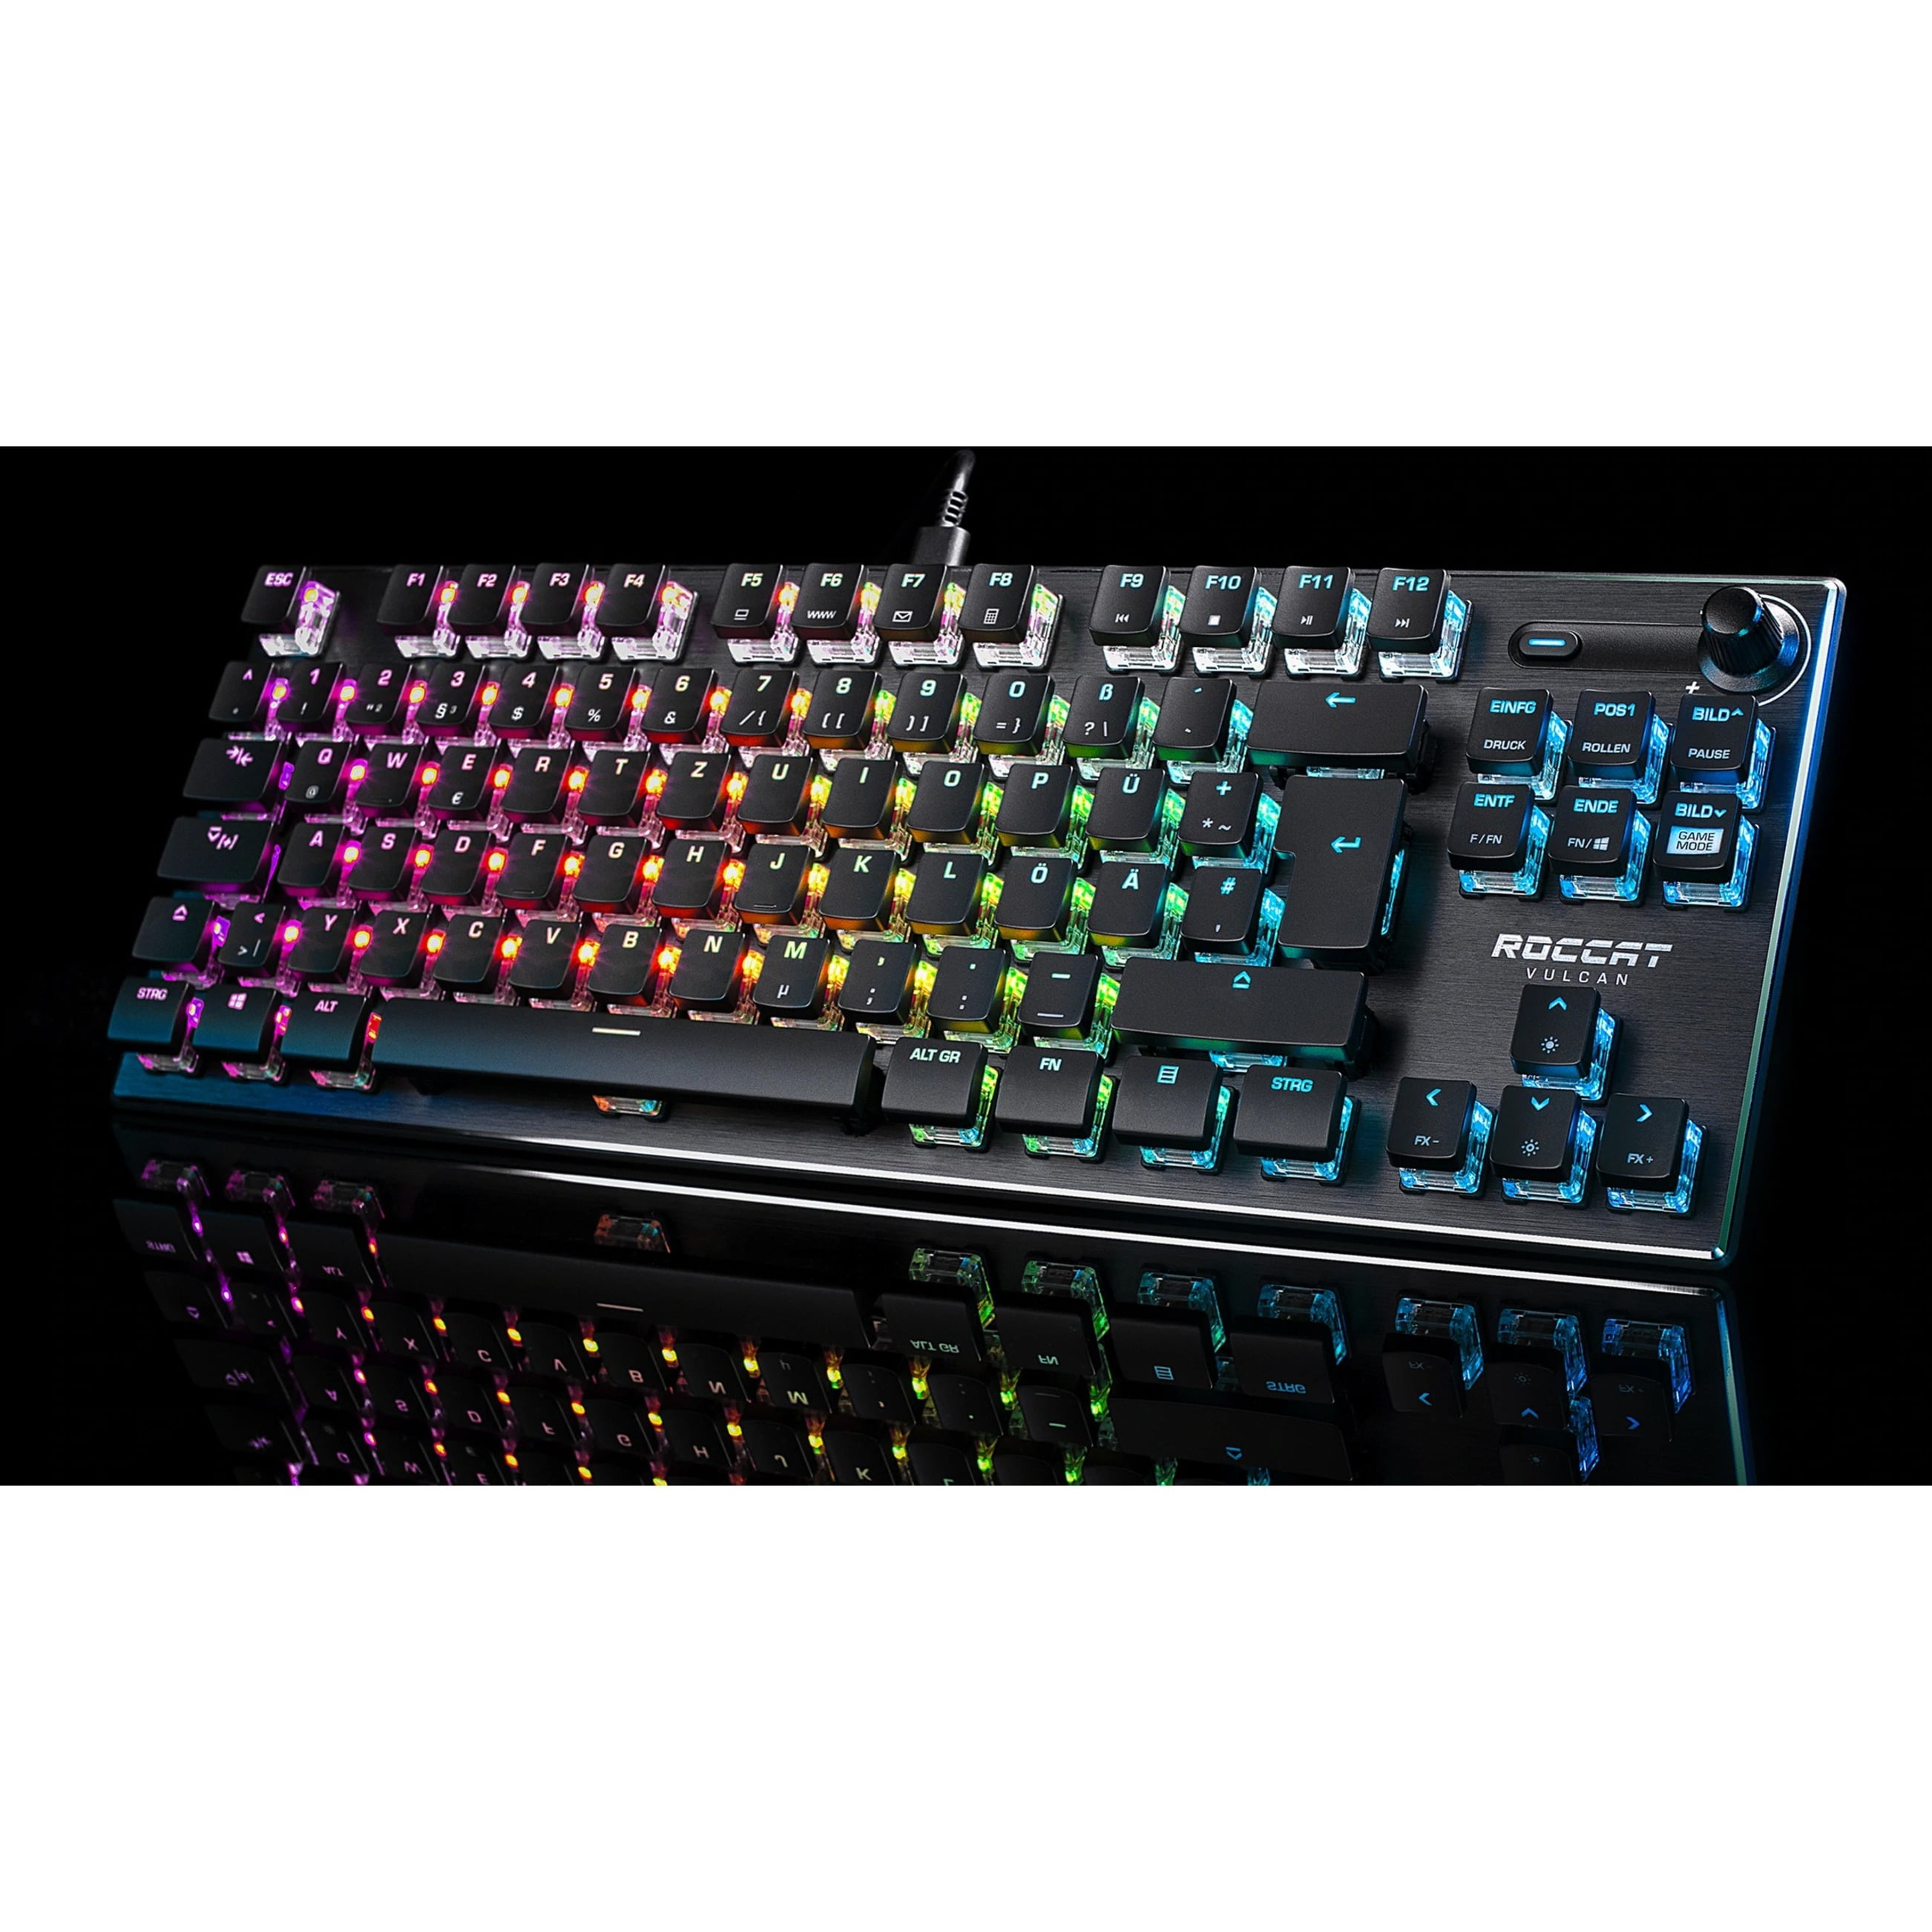 The Roccat Vulcan TKL Pro Gaming Keyboard is Available at a 20